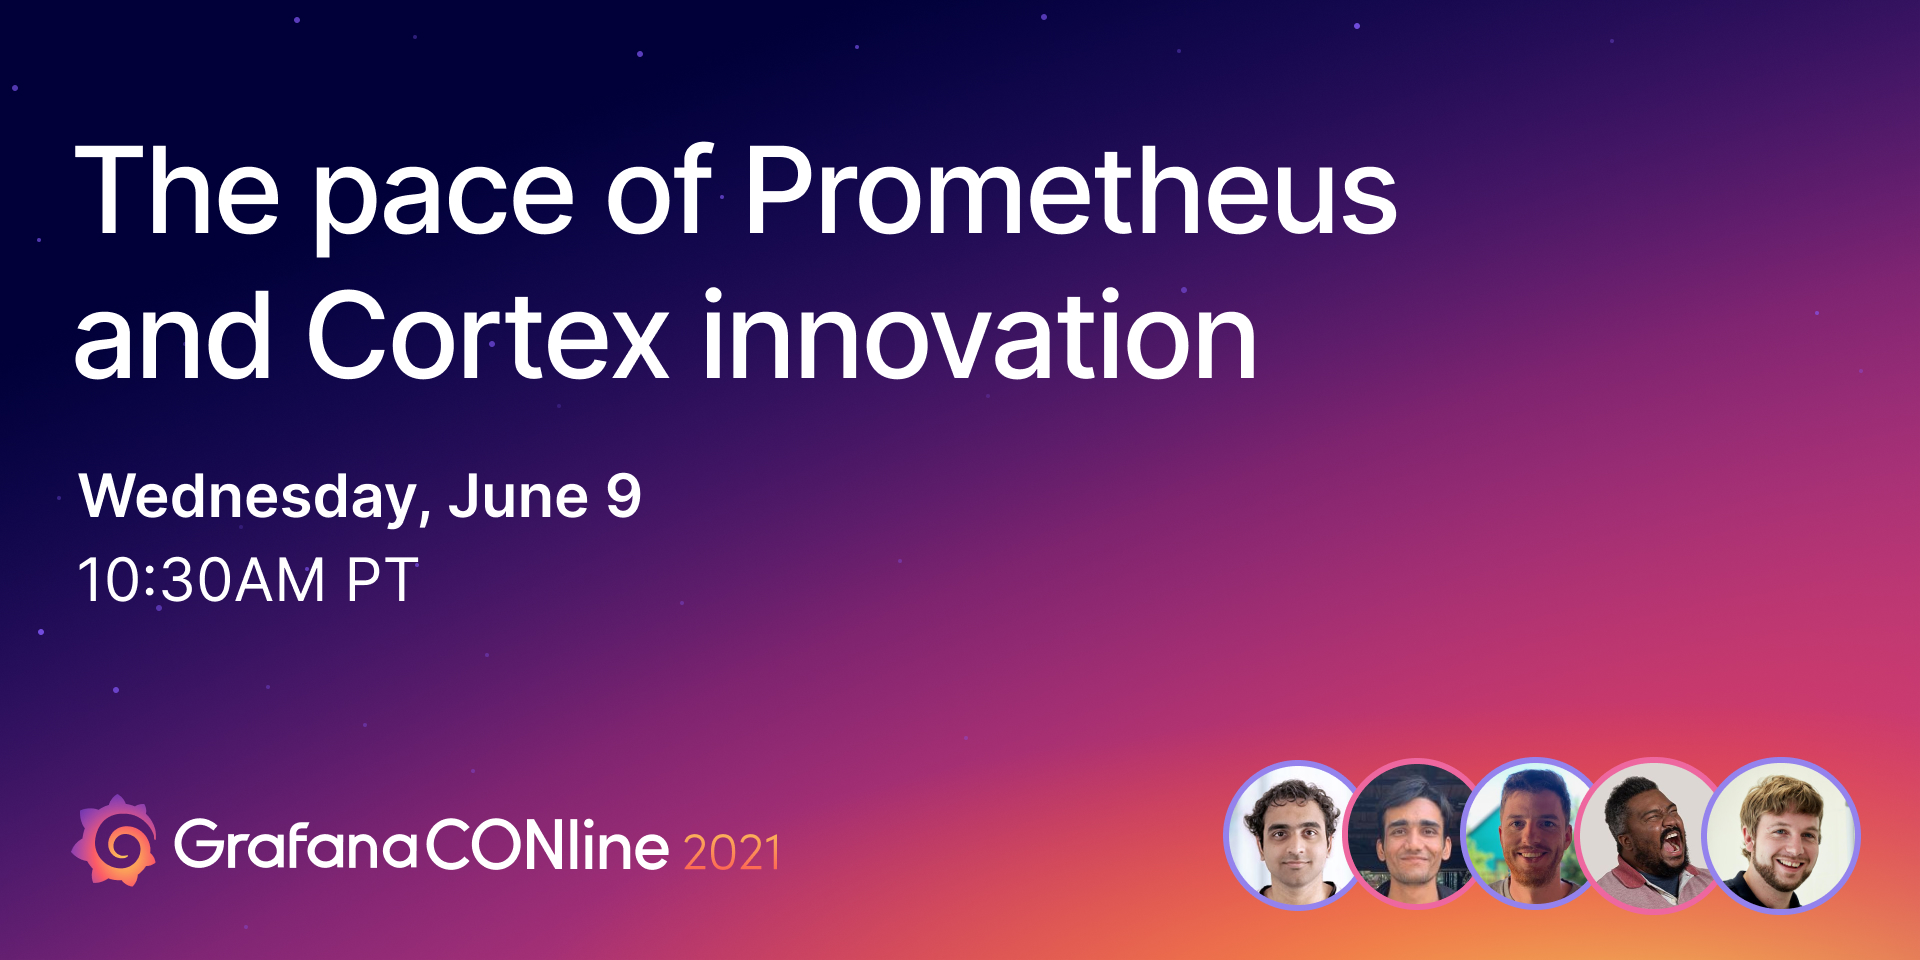 The pace of Prometheus and Cortex innovation